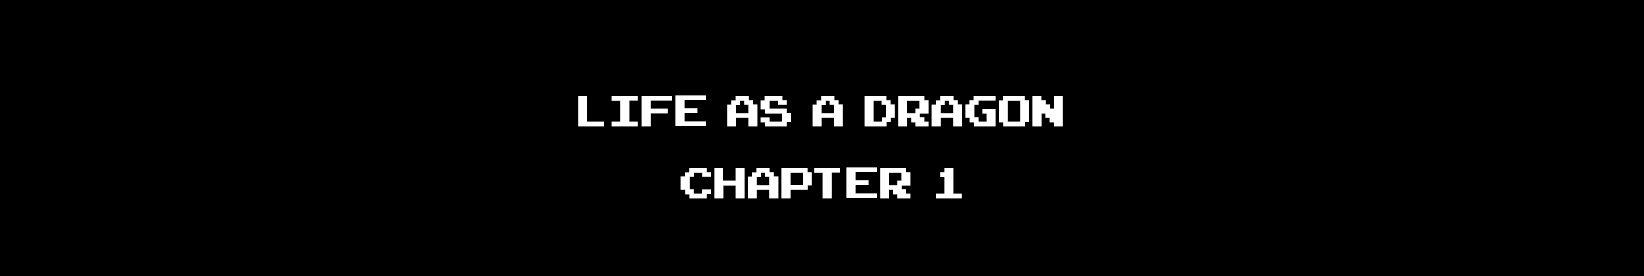 Life as a Dragon - Chapter 1